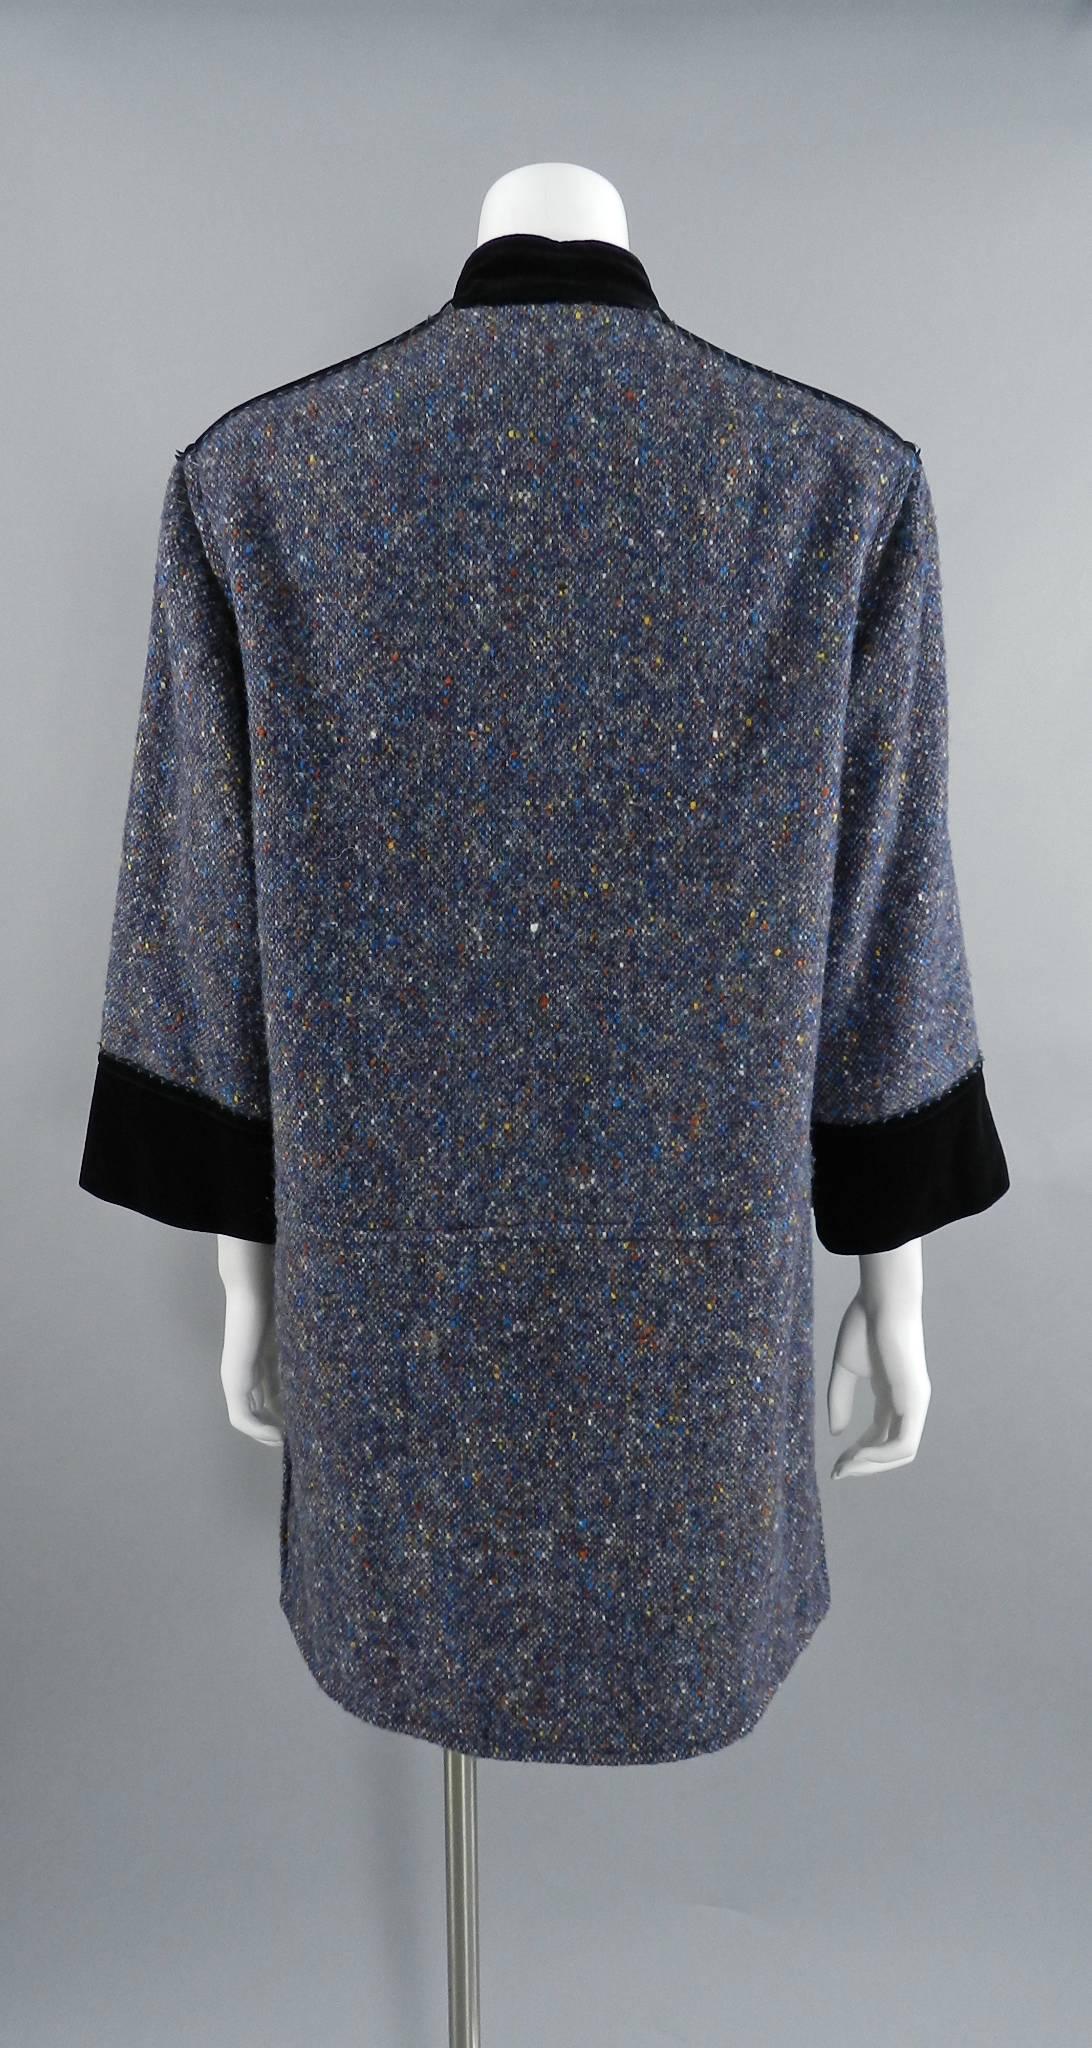 Nina Ricci boutique vintage 1970's tweed wool and velvet coat.  Purple and blue tone flecked wool body, straight-cut design, velvet and leather trim, and double row of buttons. Tagged size FR 36 (USA 4 / 6).  Garment bust measures 40